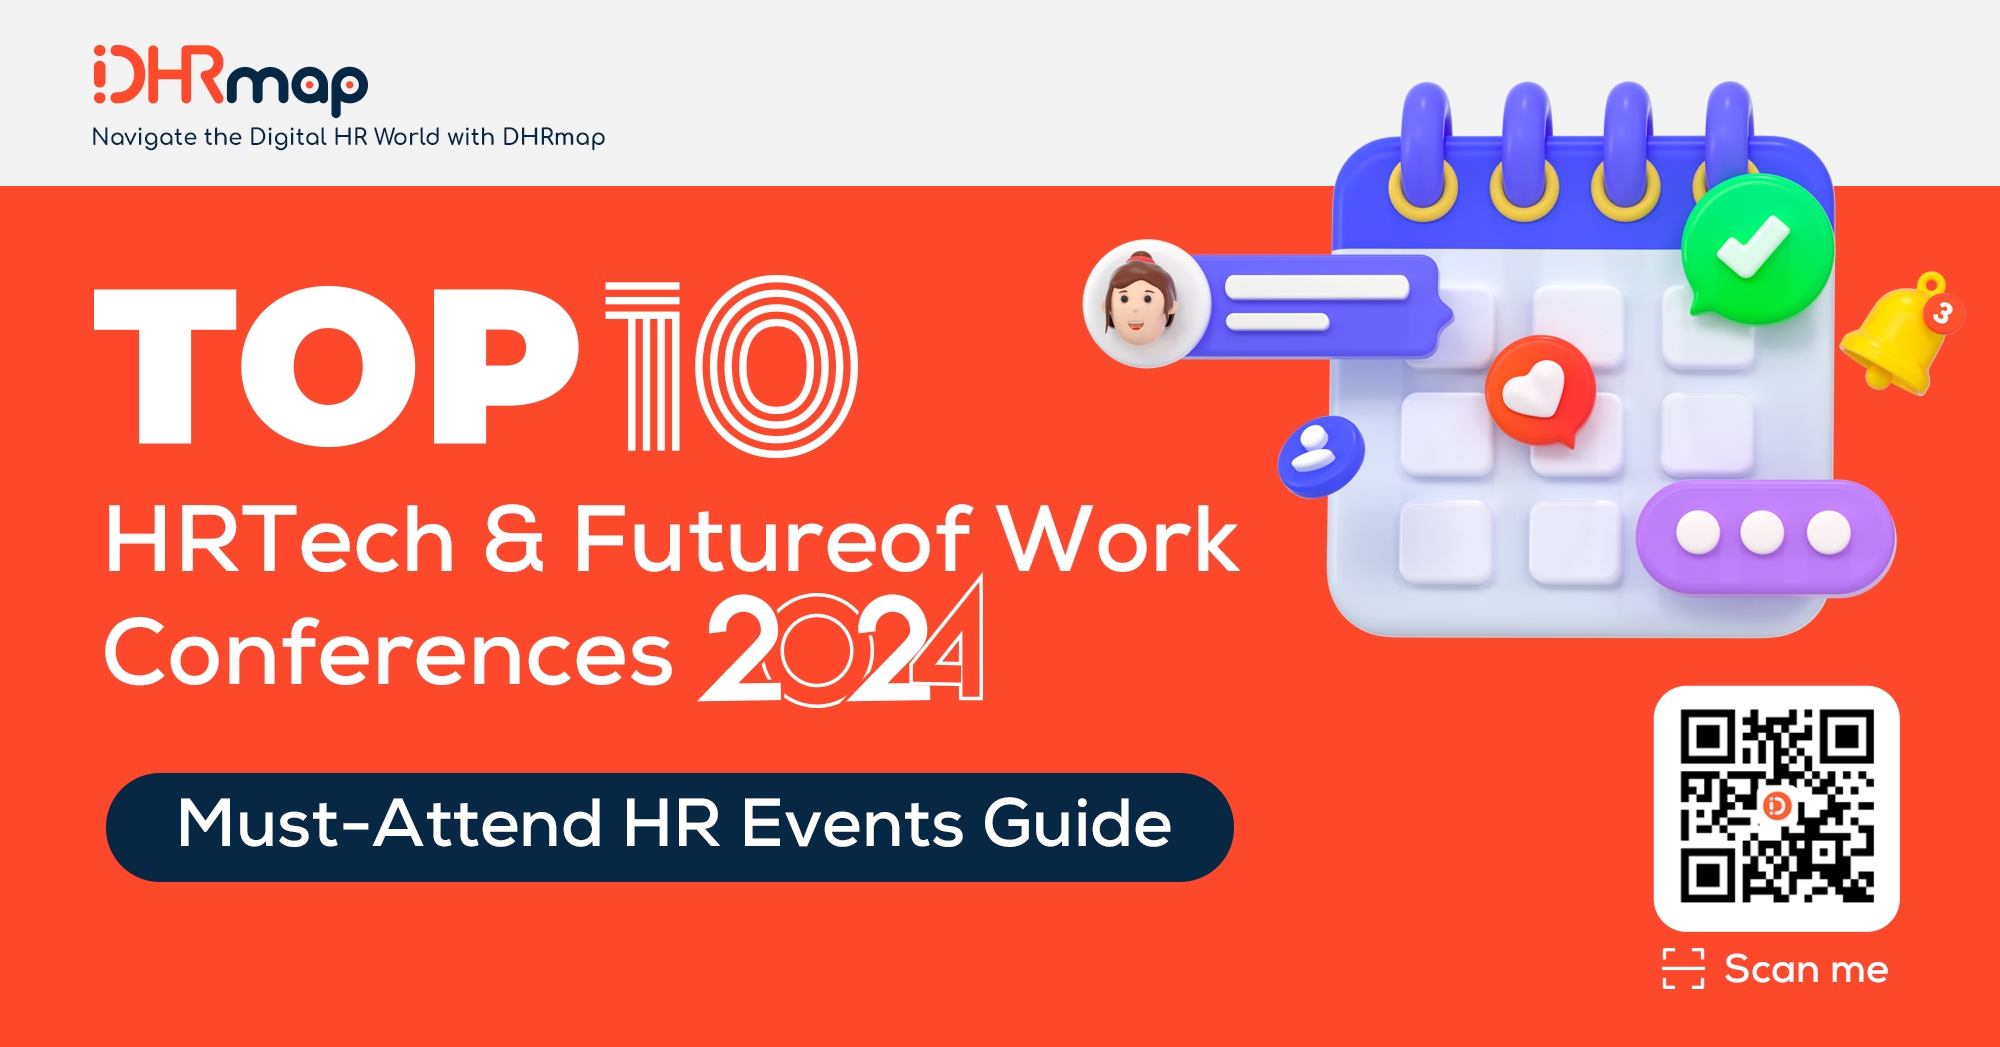 Top 10 HRTech & Future of Work Conferences 2024 MustAttend HR Events